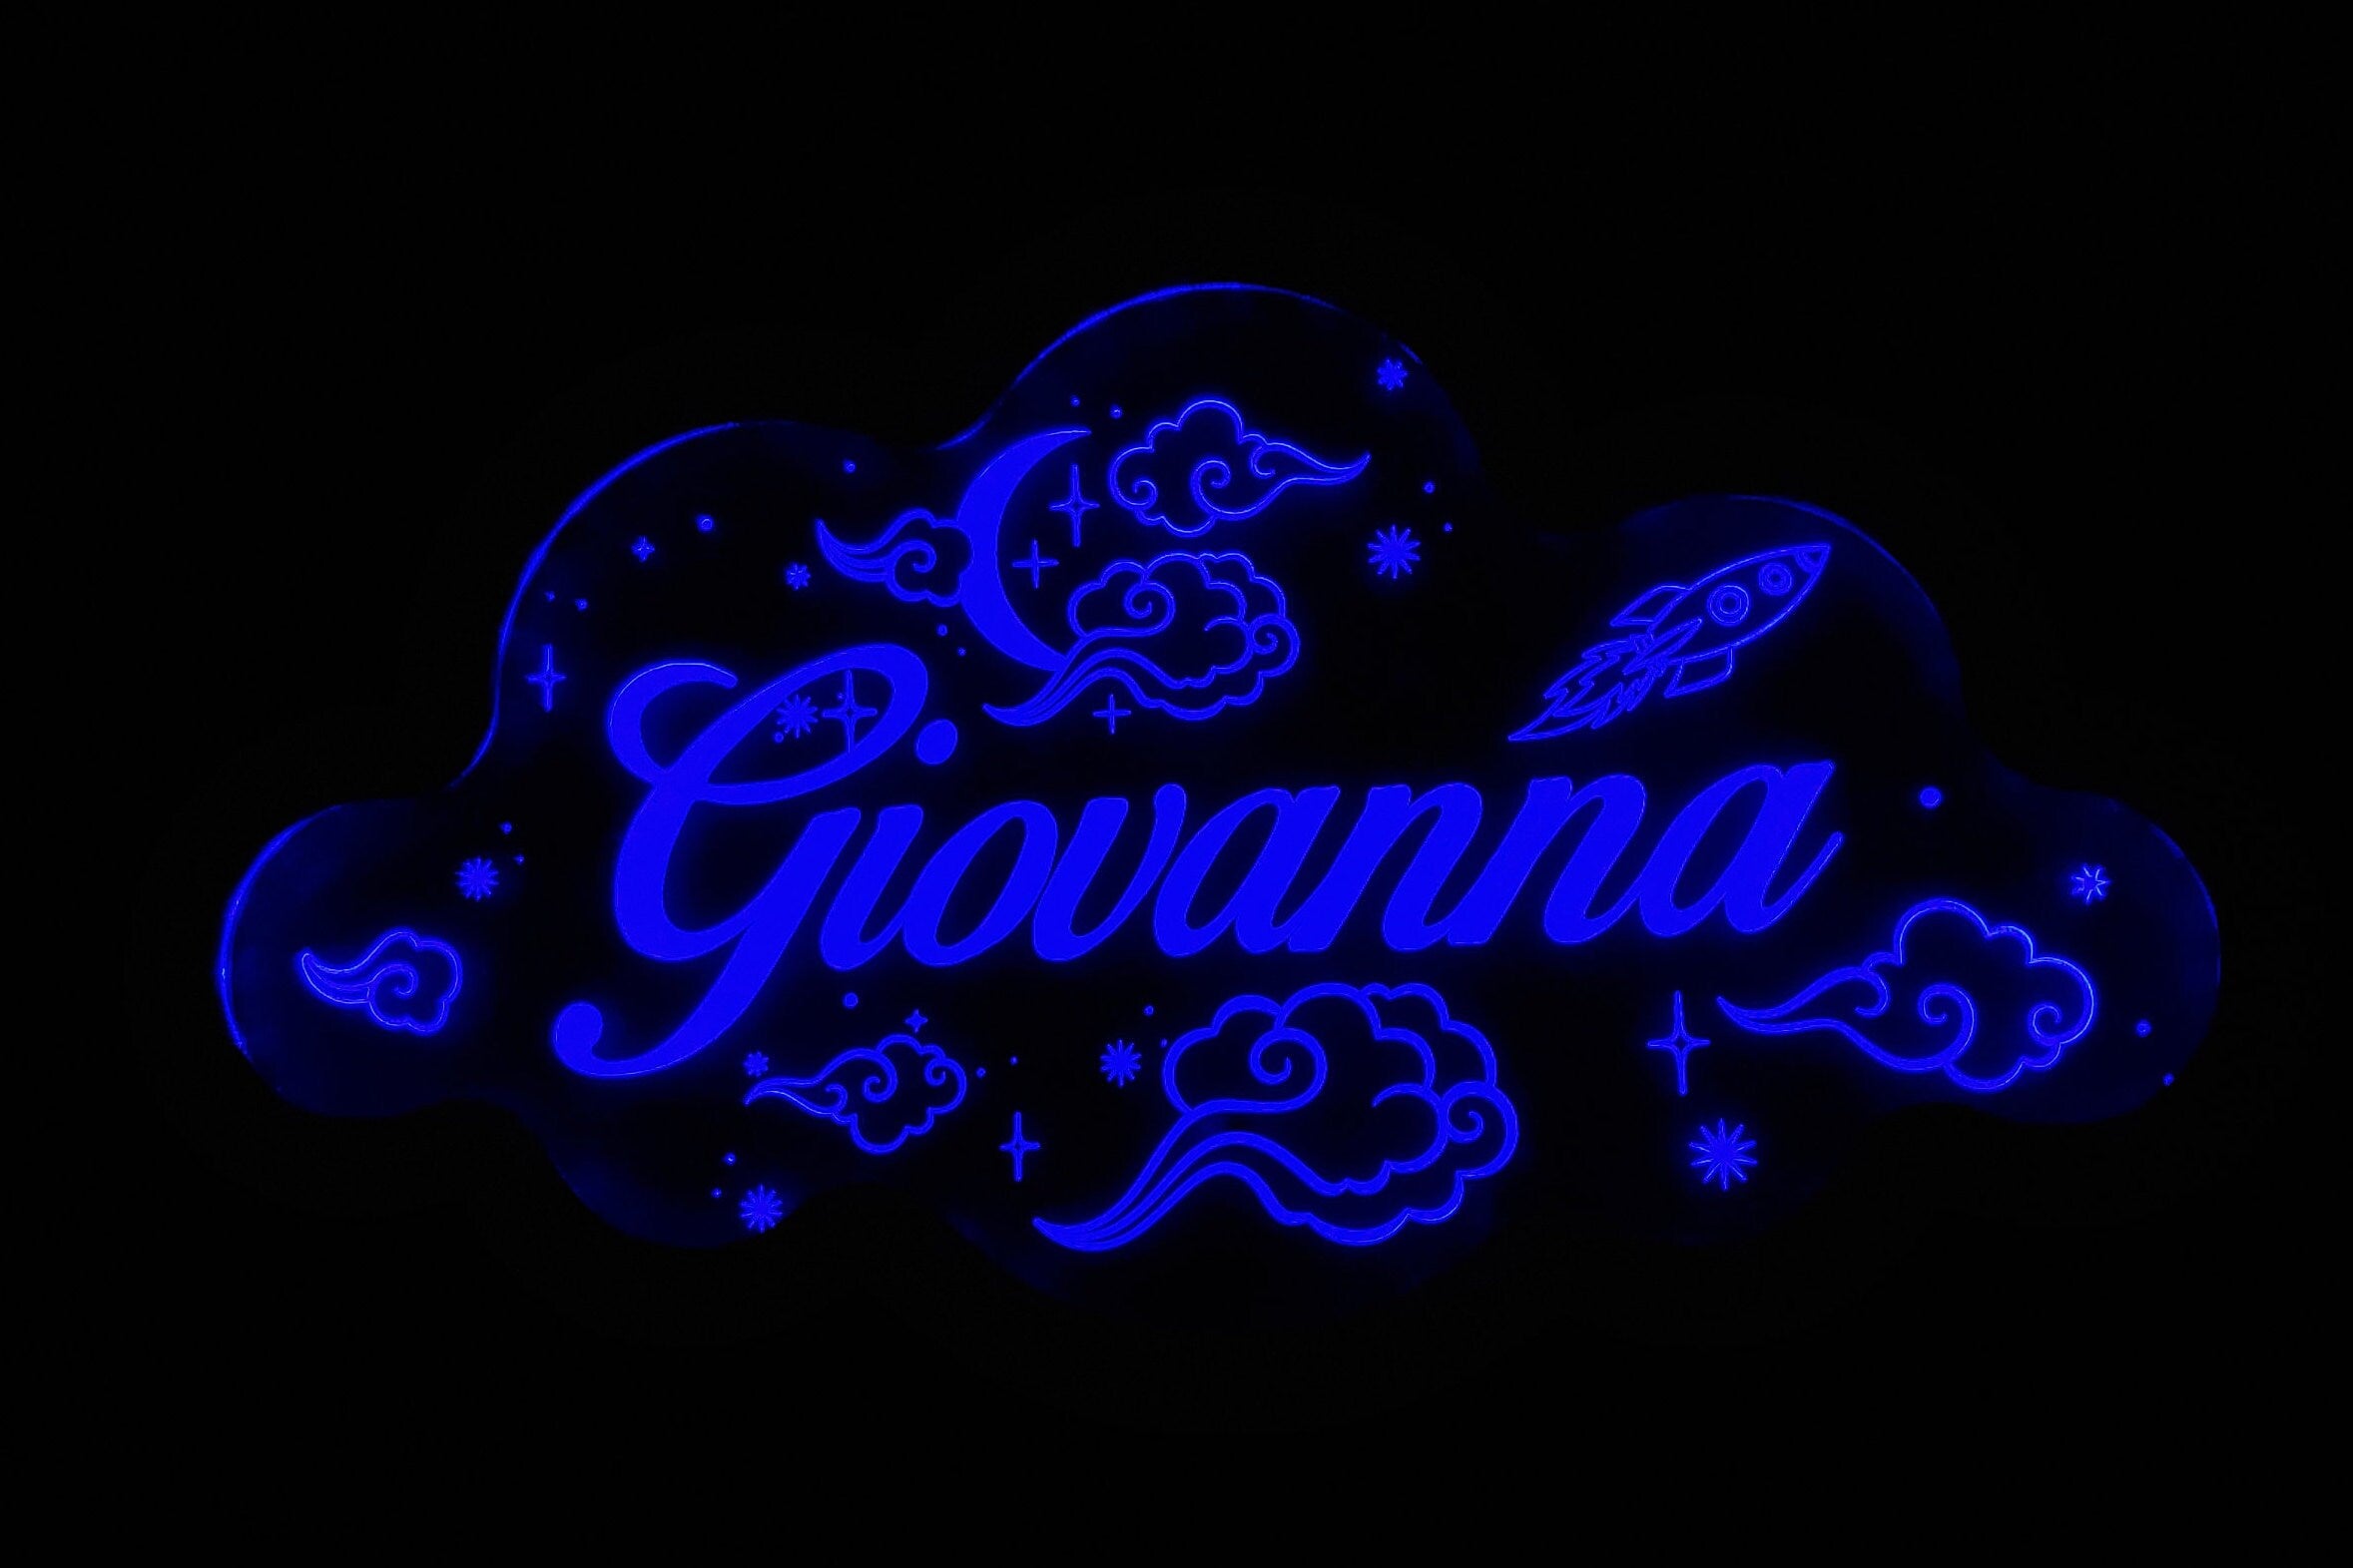 Personalized Baby Nursery Name LED Wall Sign - Neon-Like - Children's Night Light - Color Changing w Remote Control - Free Shipping